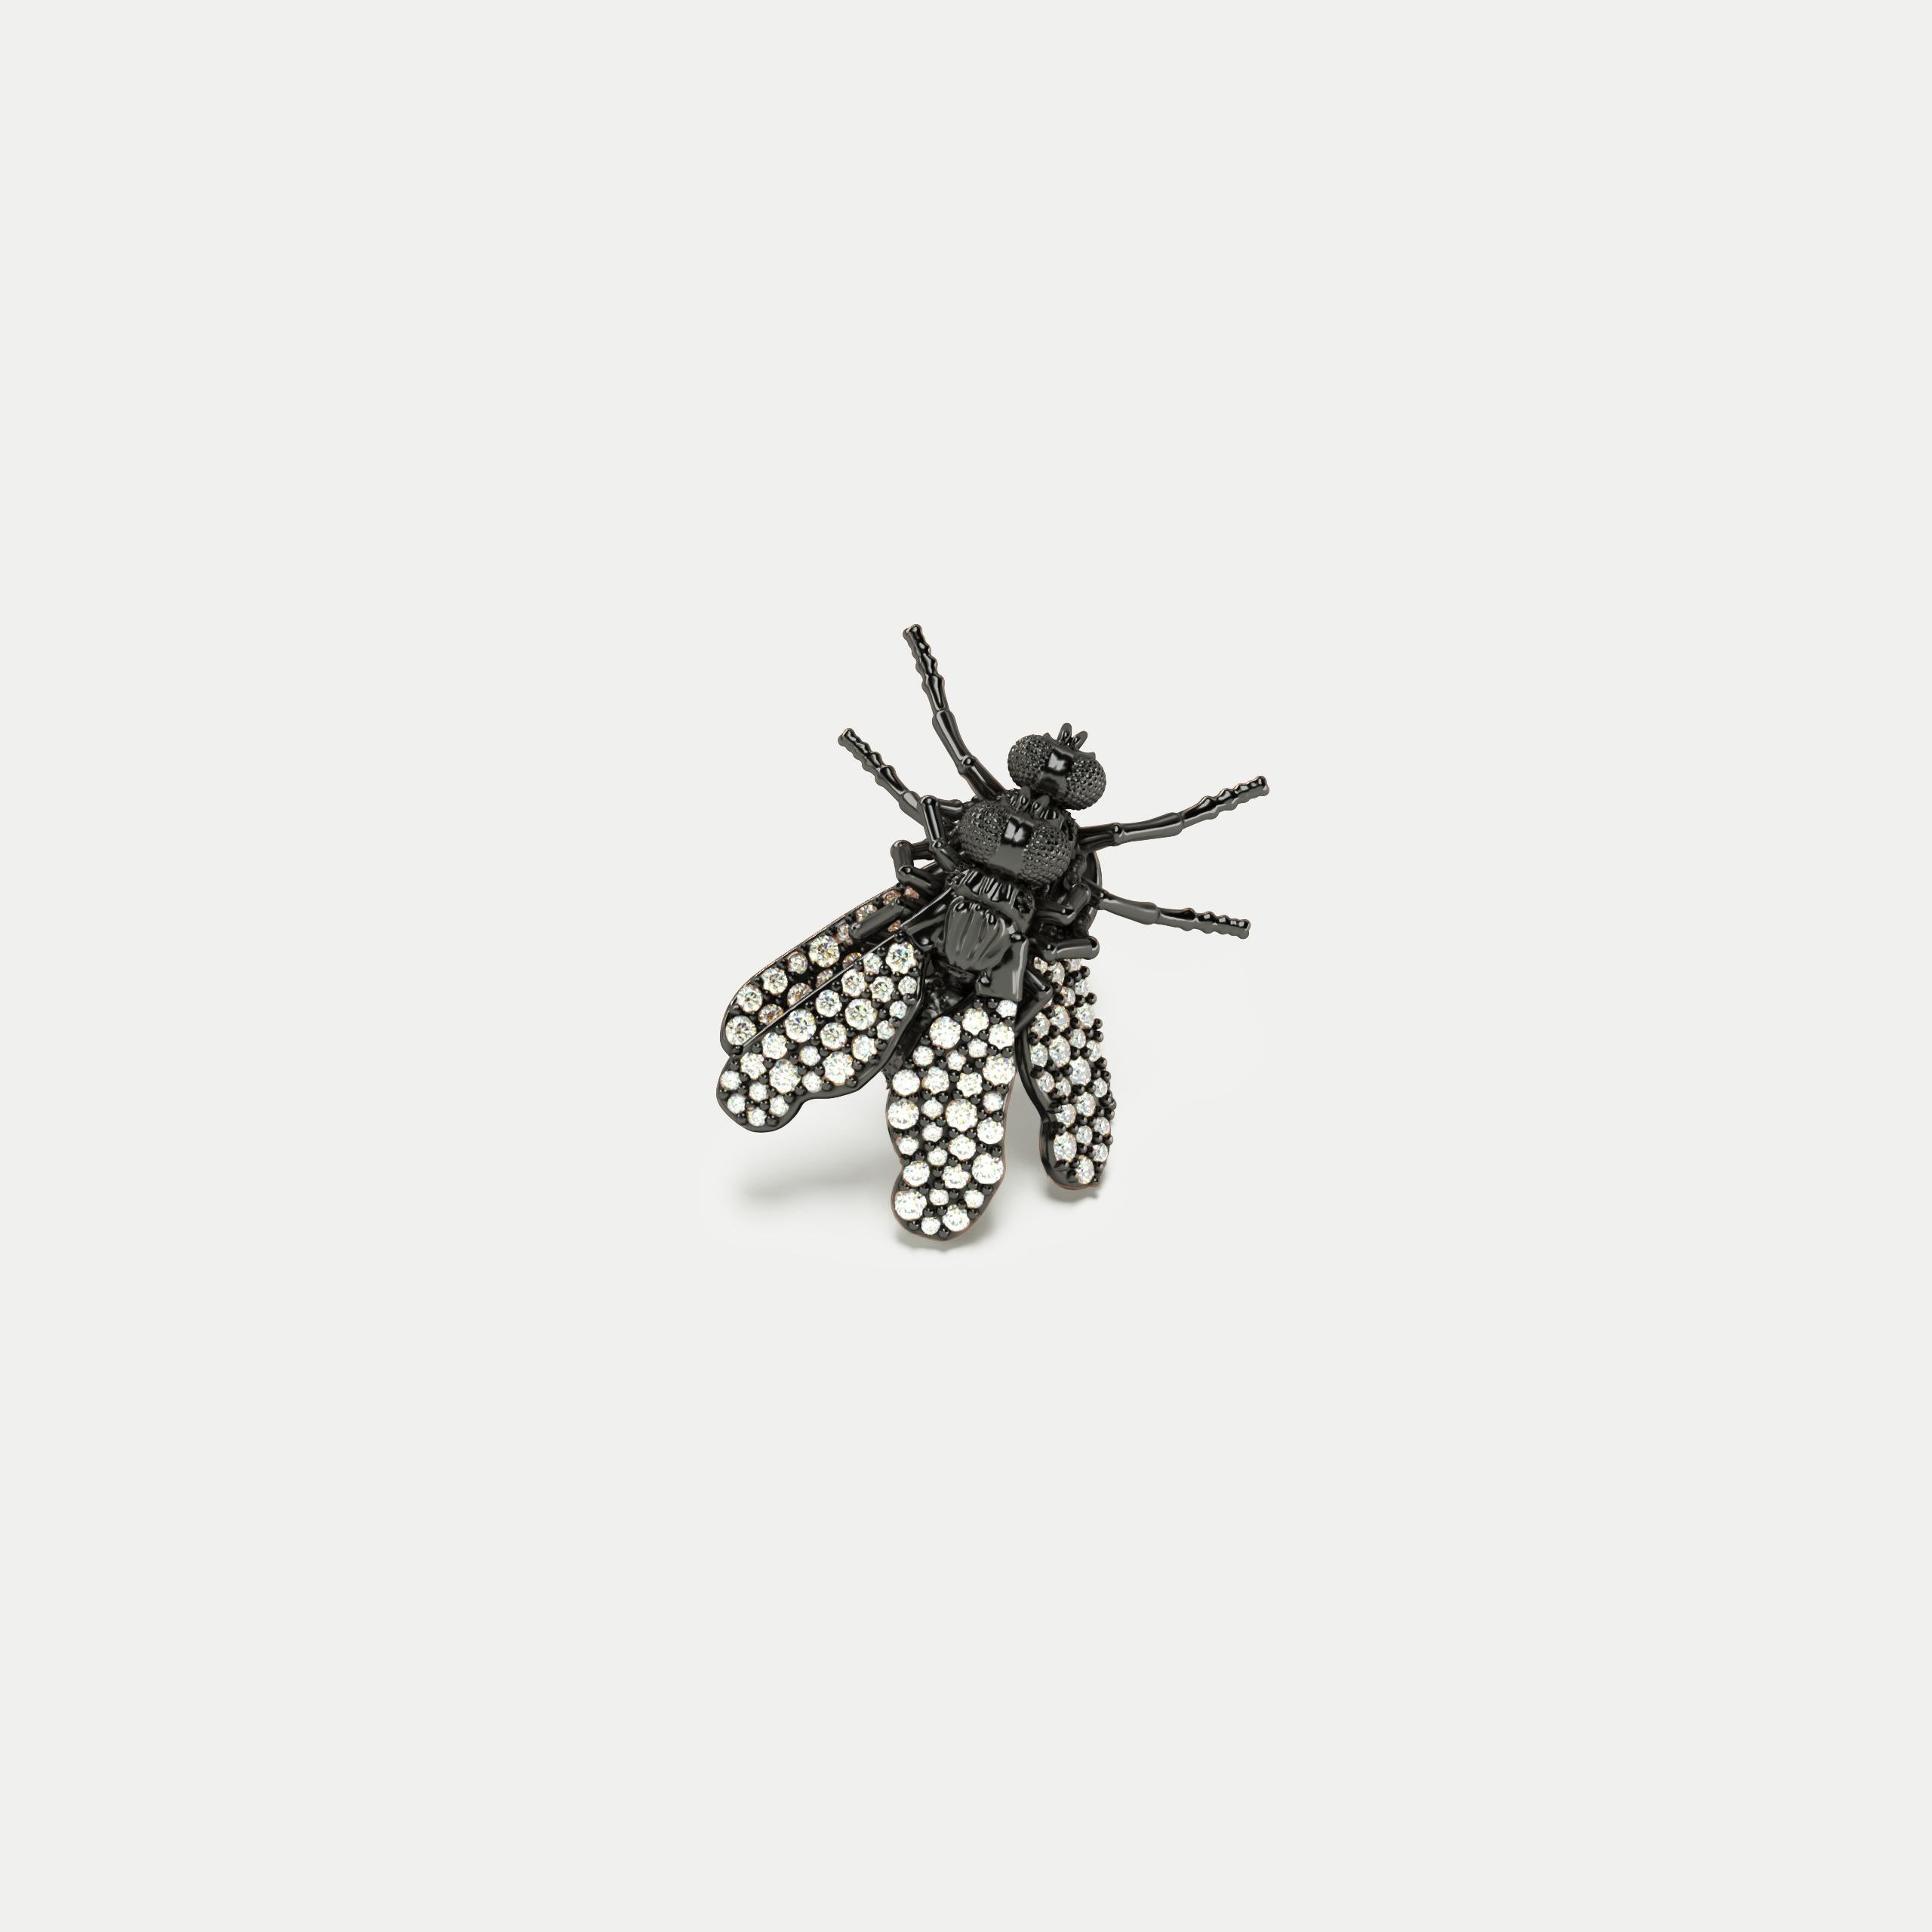 Golden Stud Fly on Fly Earring, 18K Black Gold with White Diamonds
83u. (1mm Ø) H/SI

Mono earring in the shape of two hyperrealistic flies is made of 18K black gold with white diamonds, full pavé.
The post and backing are made of steel, which